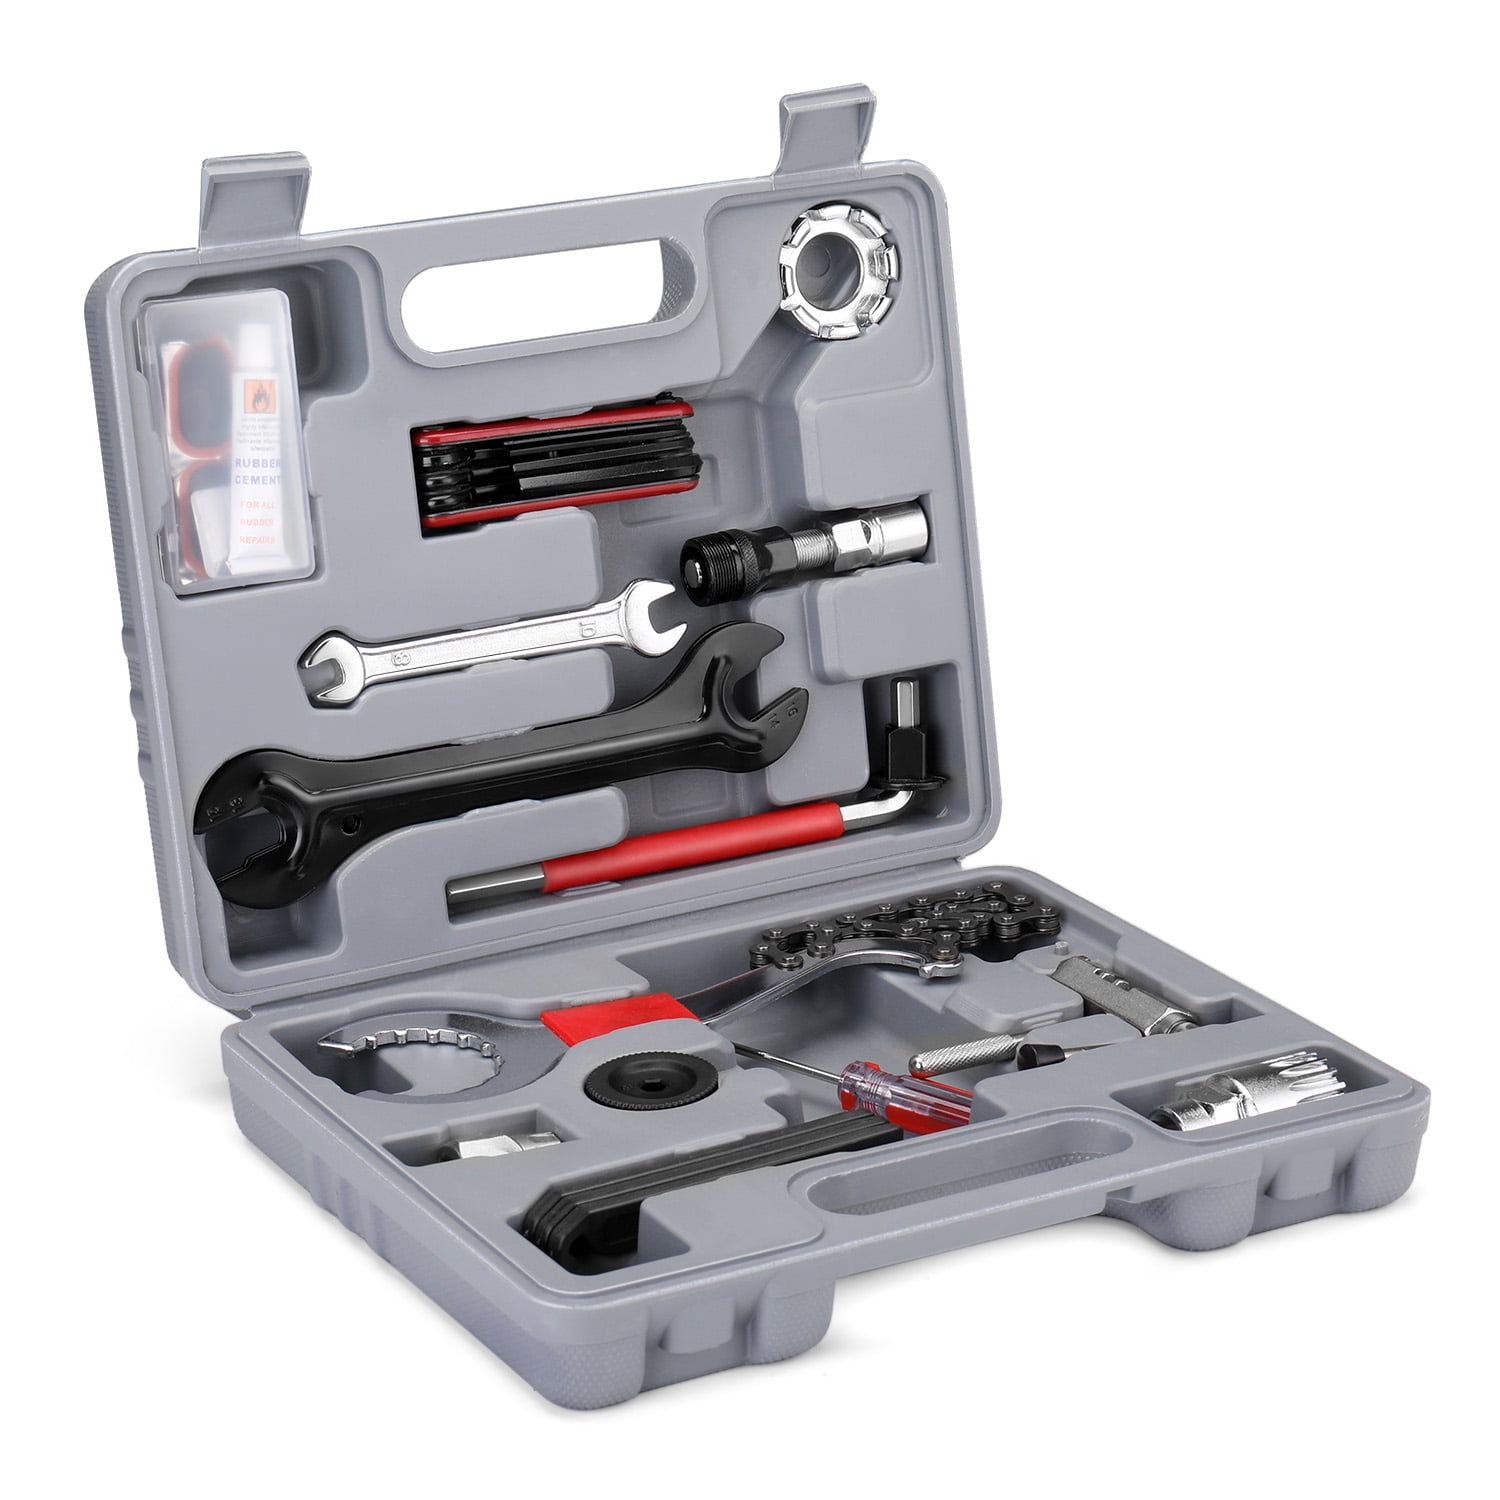 Details about   ❀Universal Bicycle Home Mechanic 25pc Tool Kit Set Repair With A Case US Stock 